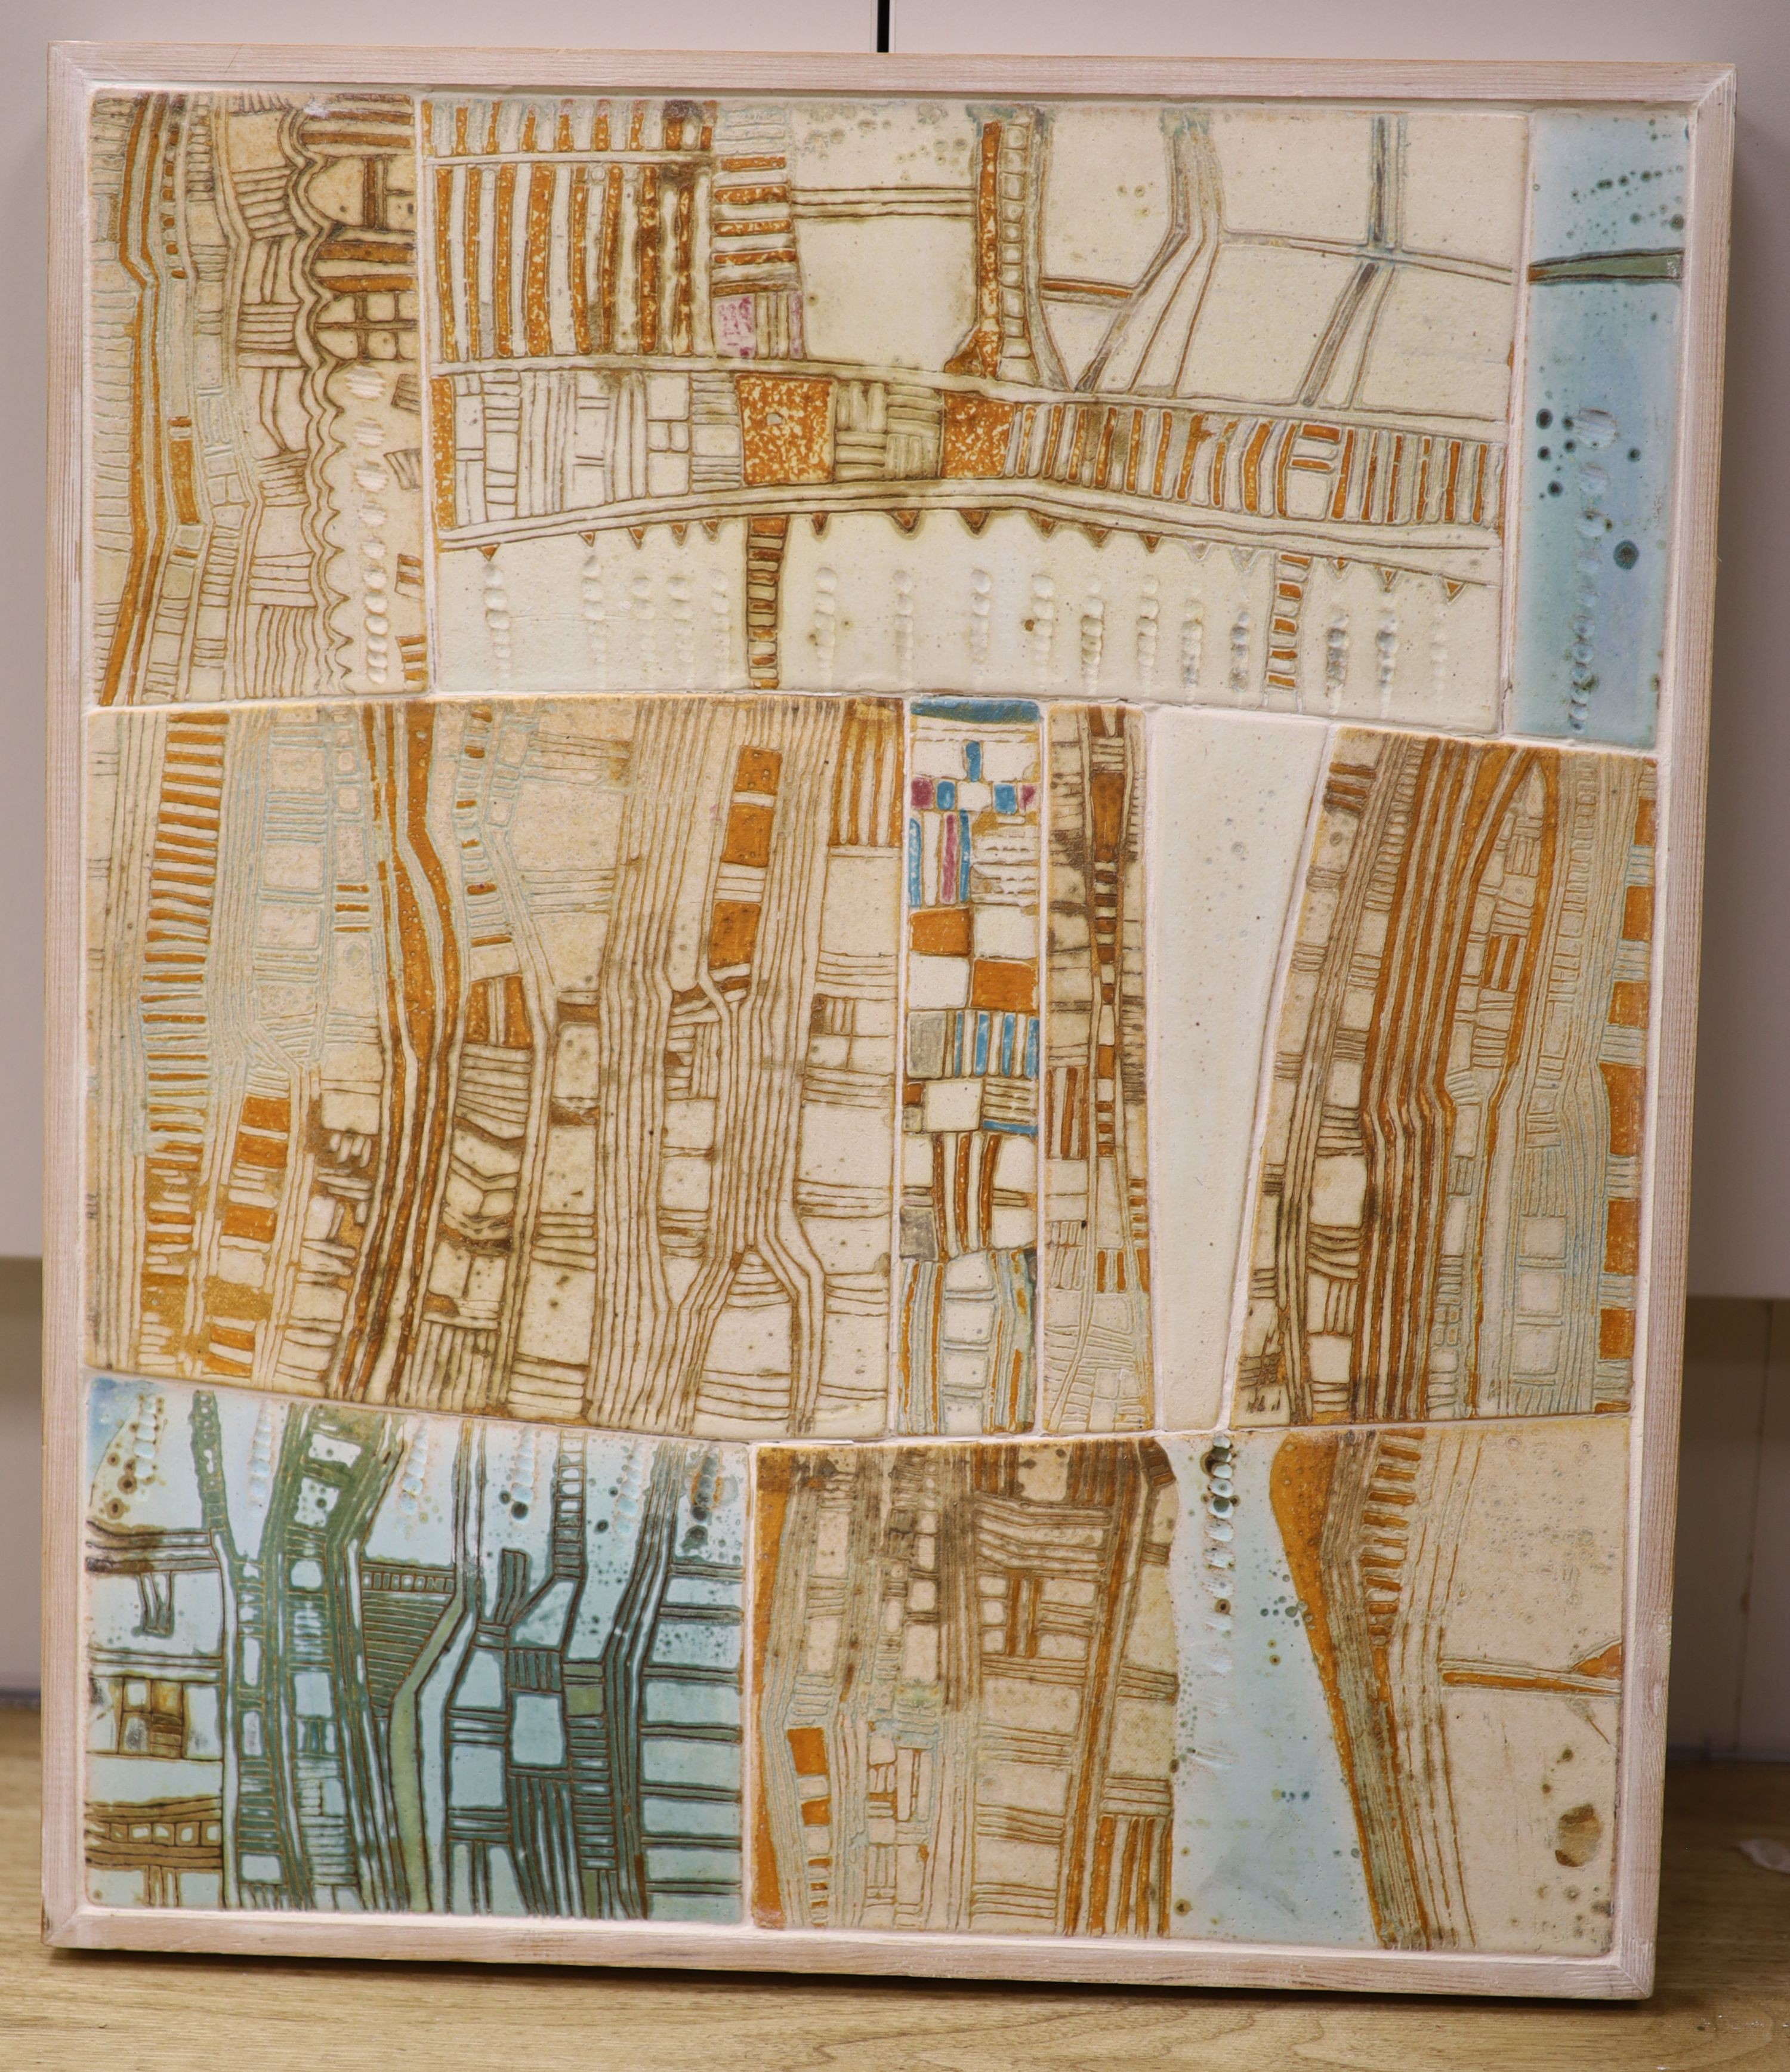 Linda John, 'Urbane Landscape', stoneware tiles with incised decoration in pale blue, brown and orange, Gallery on The Green label verso, signed and dated '98 verso, 44cm x 38cm